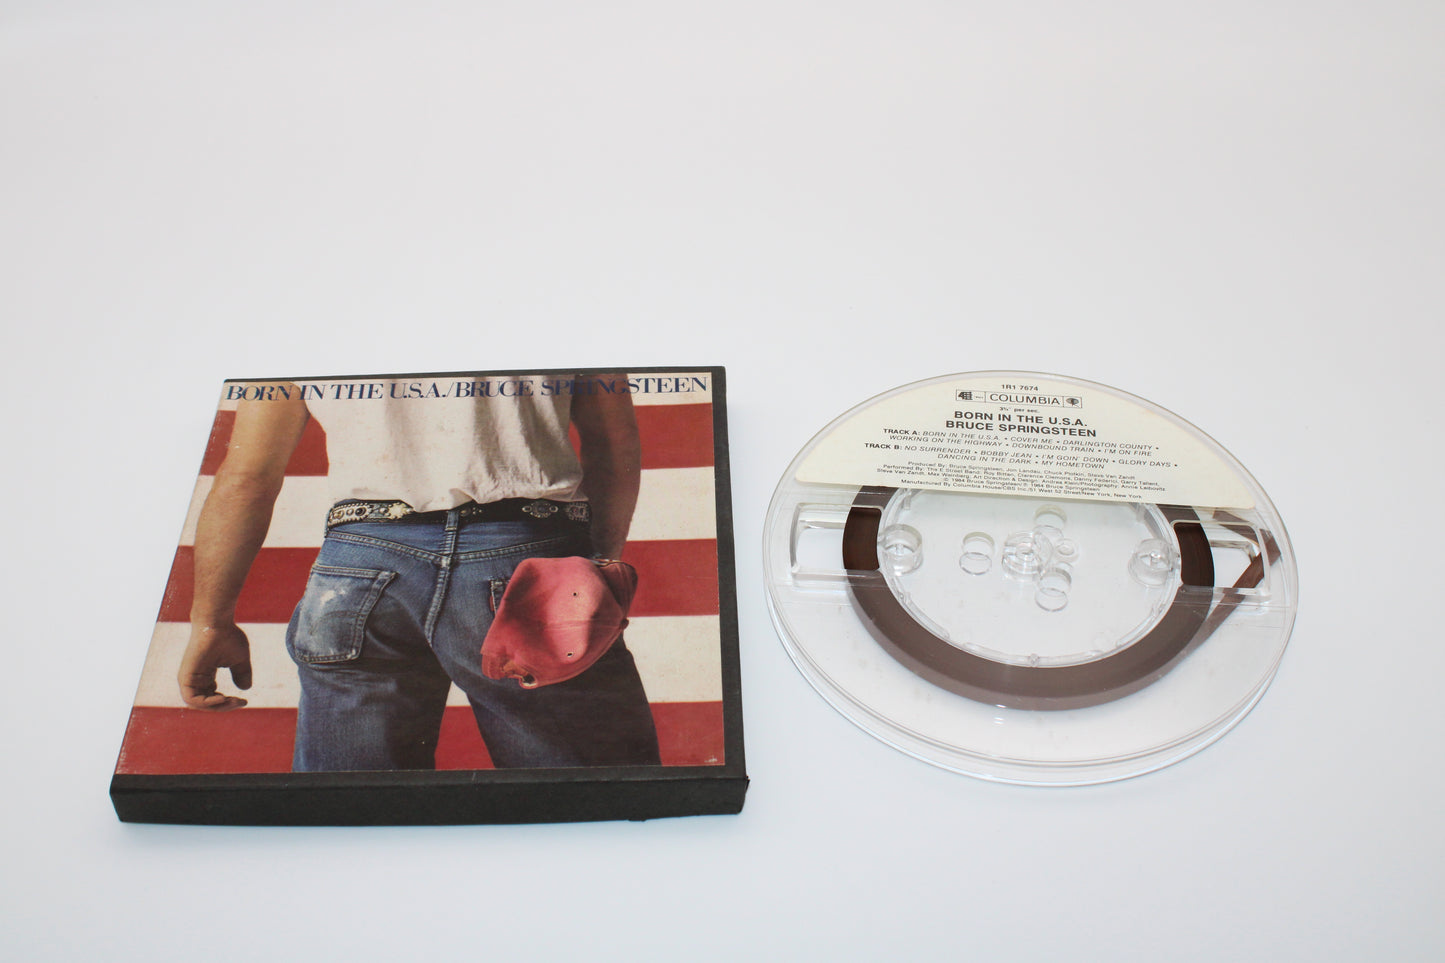 Bruce Springsteen Reel to Reel 4 Collection Complete Set - Born to Run, Darkness on the Edge of Town, Nebraska, Born in the USA